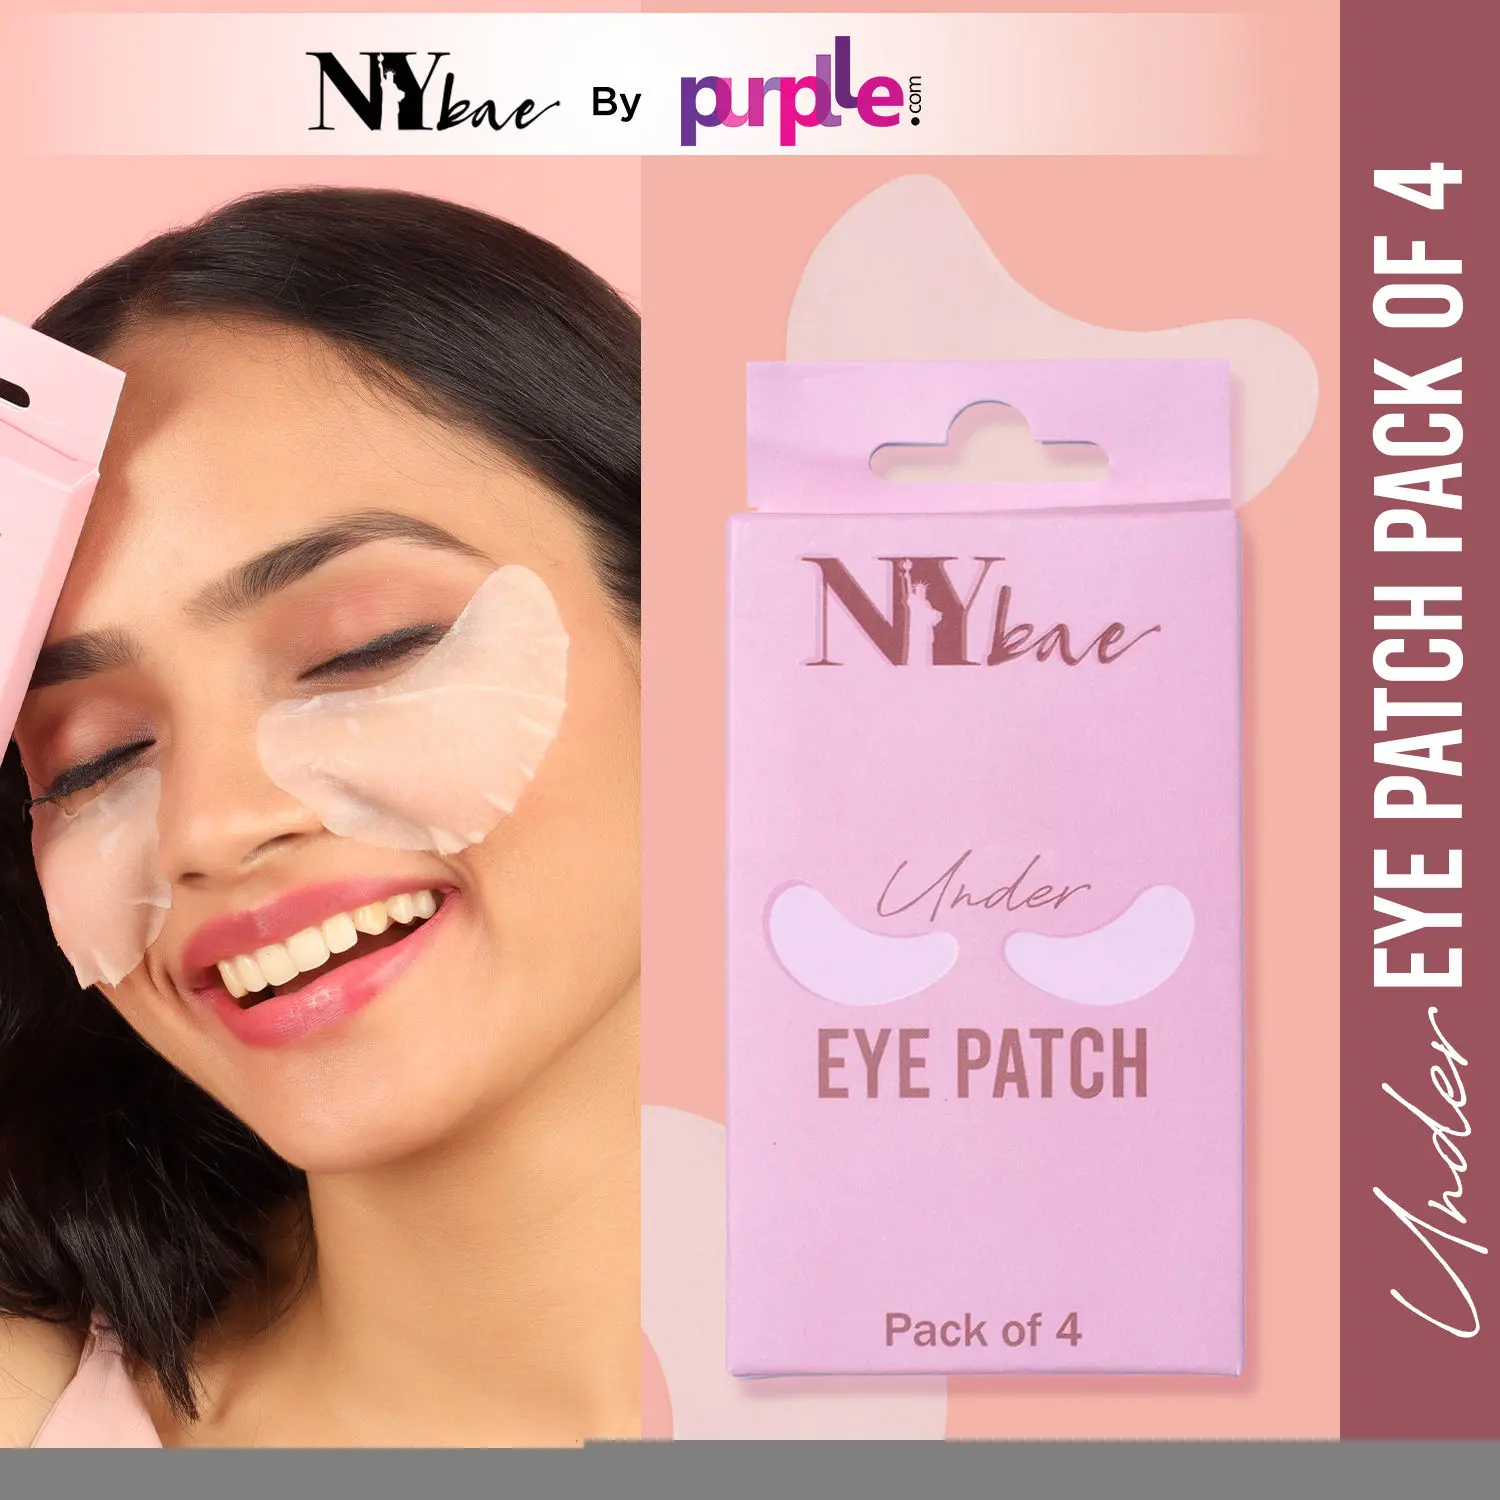 NY Bae Under Eye Patch- Pack Of 4 | Soothes Puffy Eyes | Wet Serum Patch | Travel Friendly | Alcohol Free